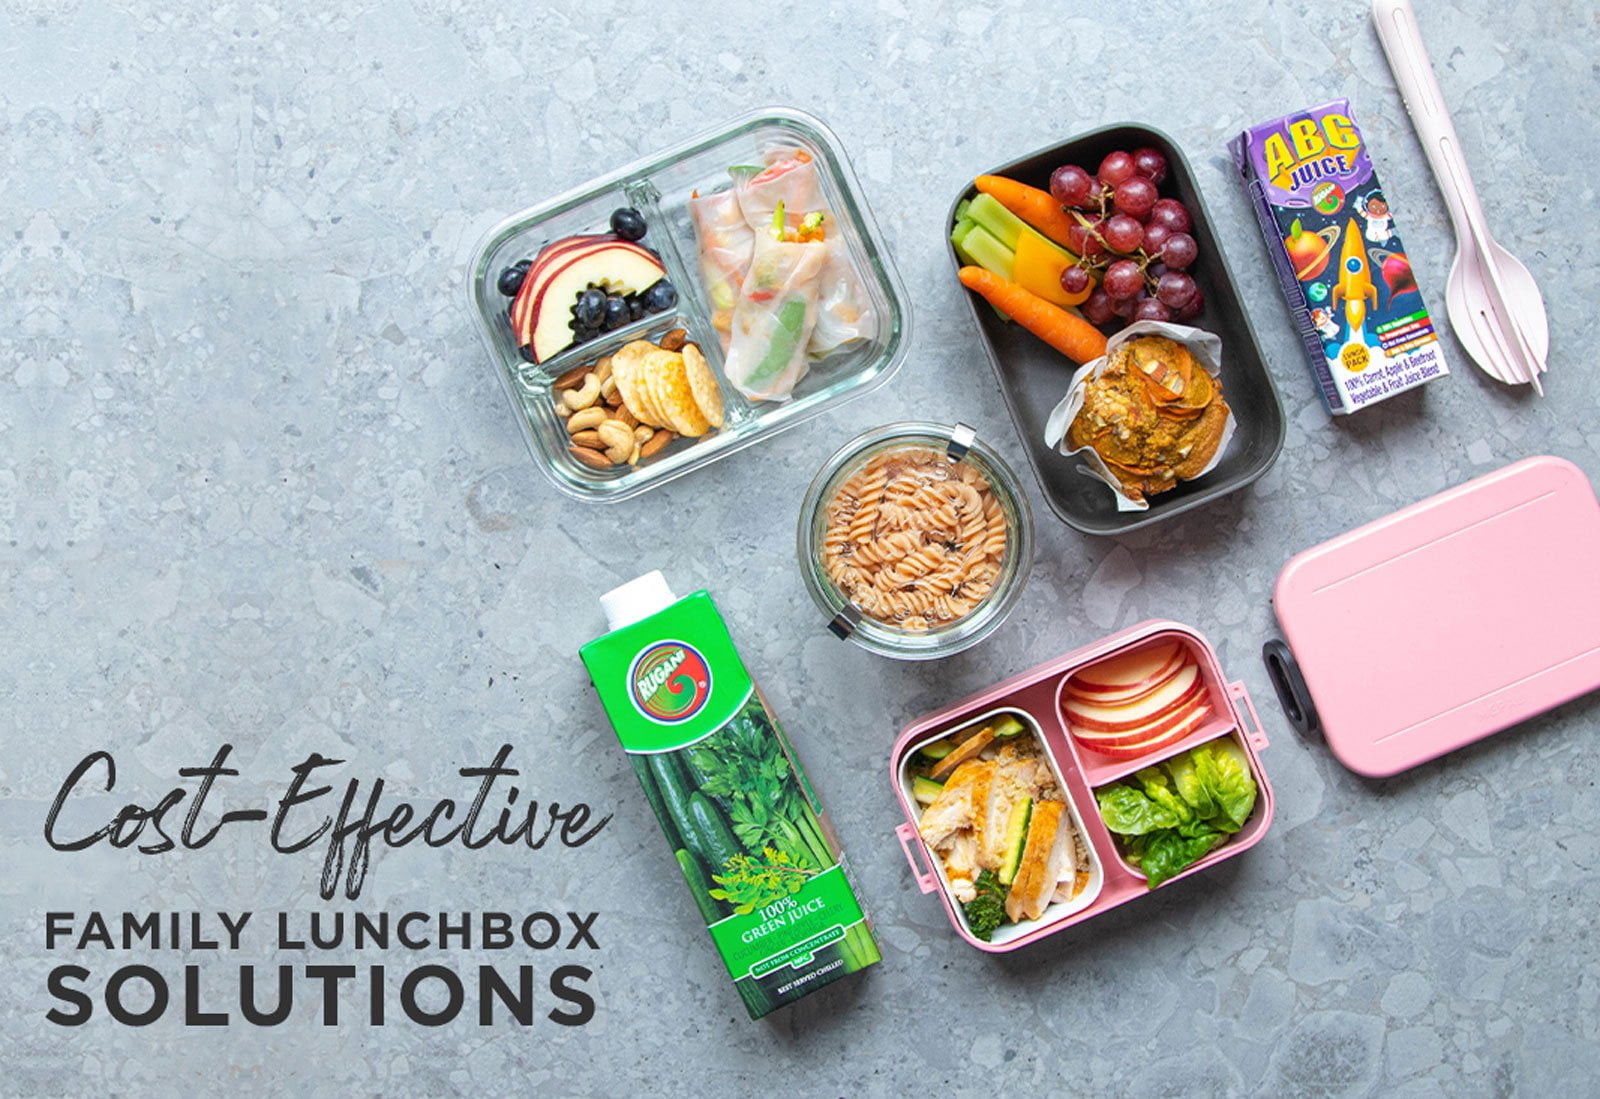 Cost effective family lunchbox solutions